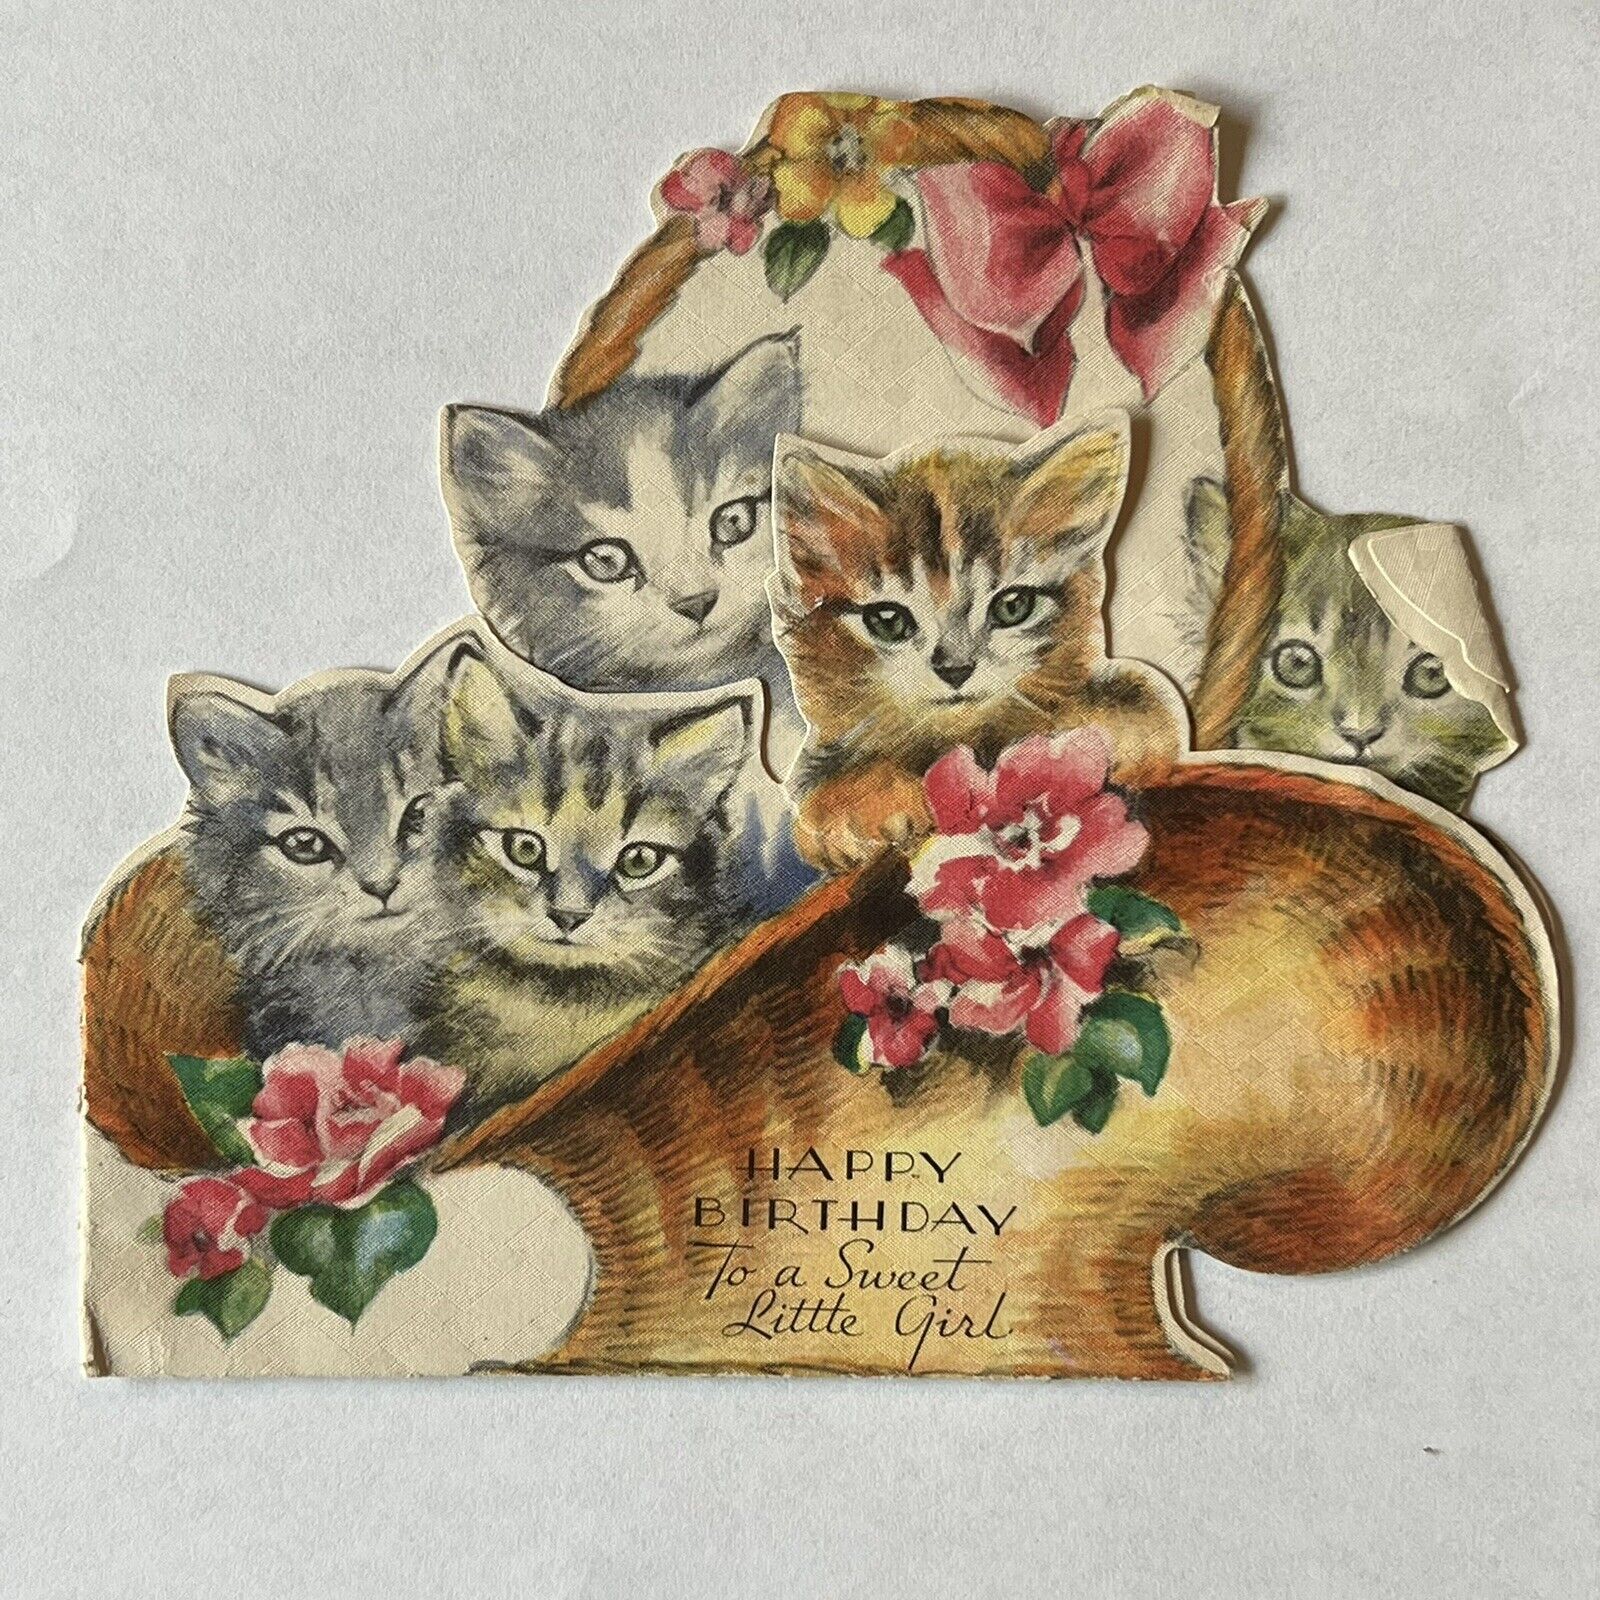 ANTIQUE HAMPTON 2037 HAPPY BIRTHDAY GREETINGS CARD SHAPED OUT OF CATS